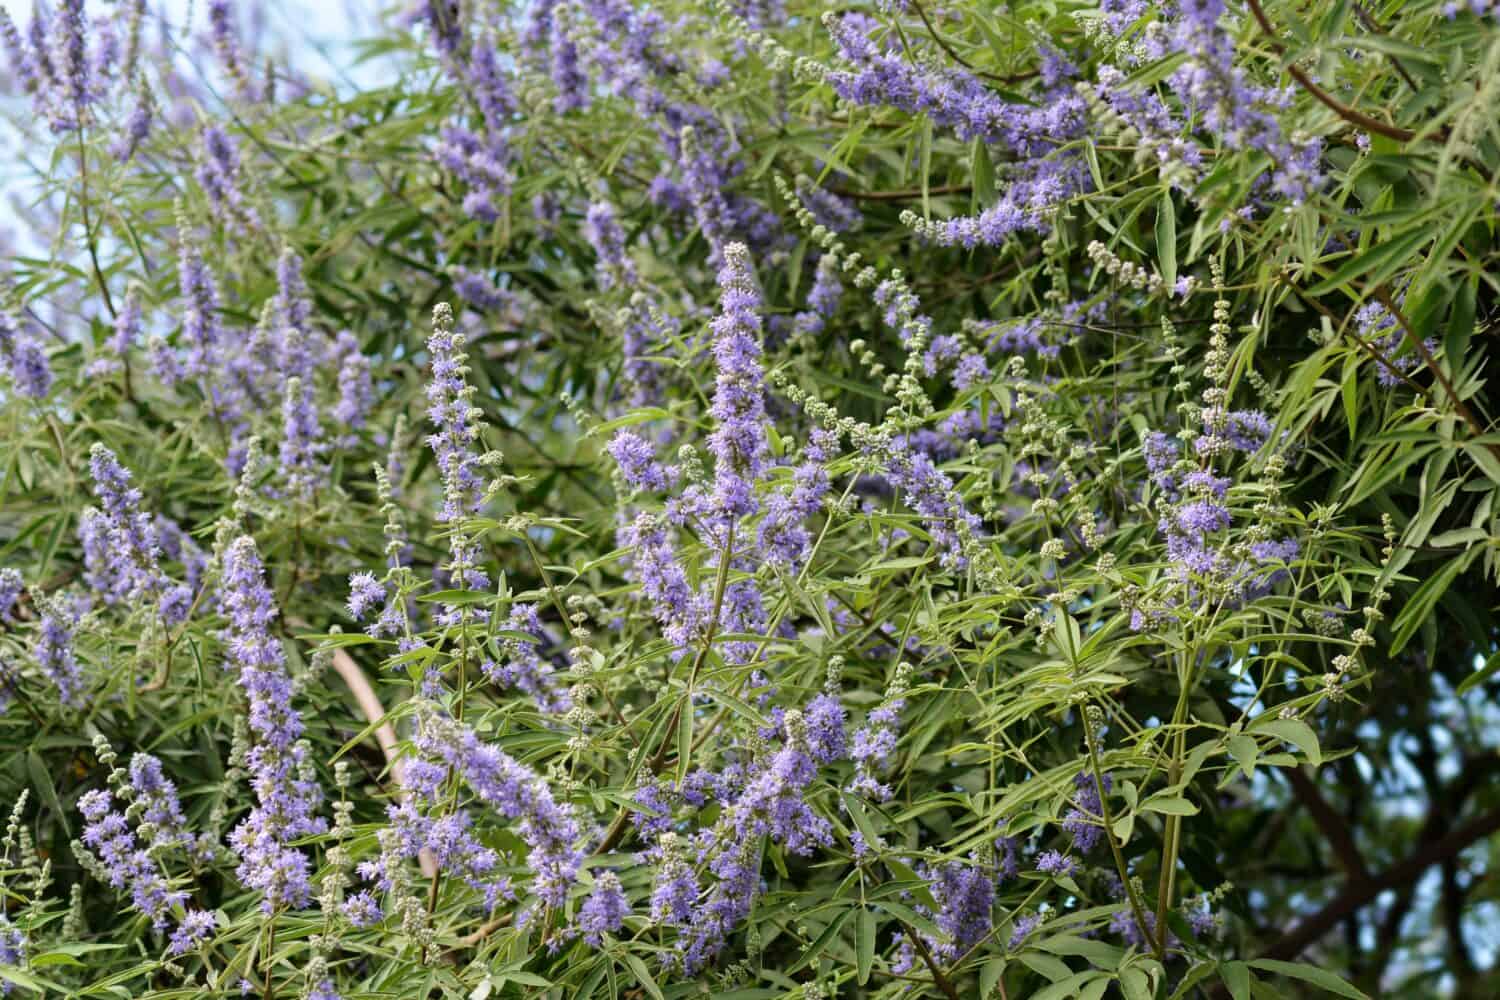 Lilac chaste tree branches with flowers - Latin name - Vitex agnus-castus